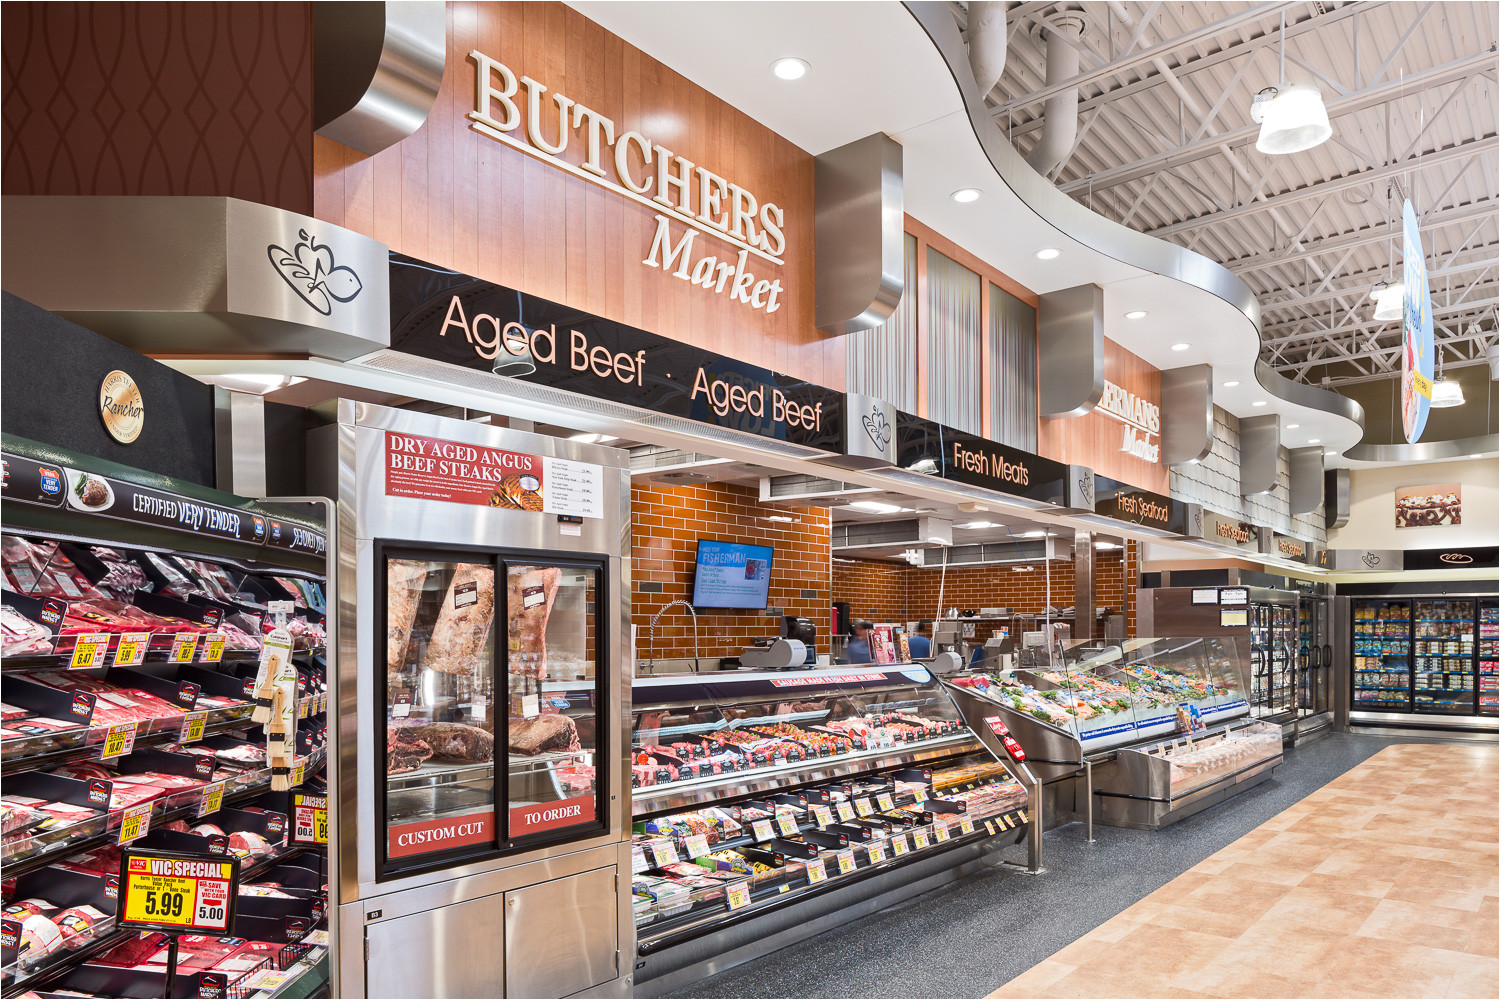 the greenville sc store features some beautiful interior and exterior changes from other harris teeter stores thanks to the creative folks at harris teeter